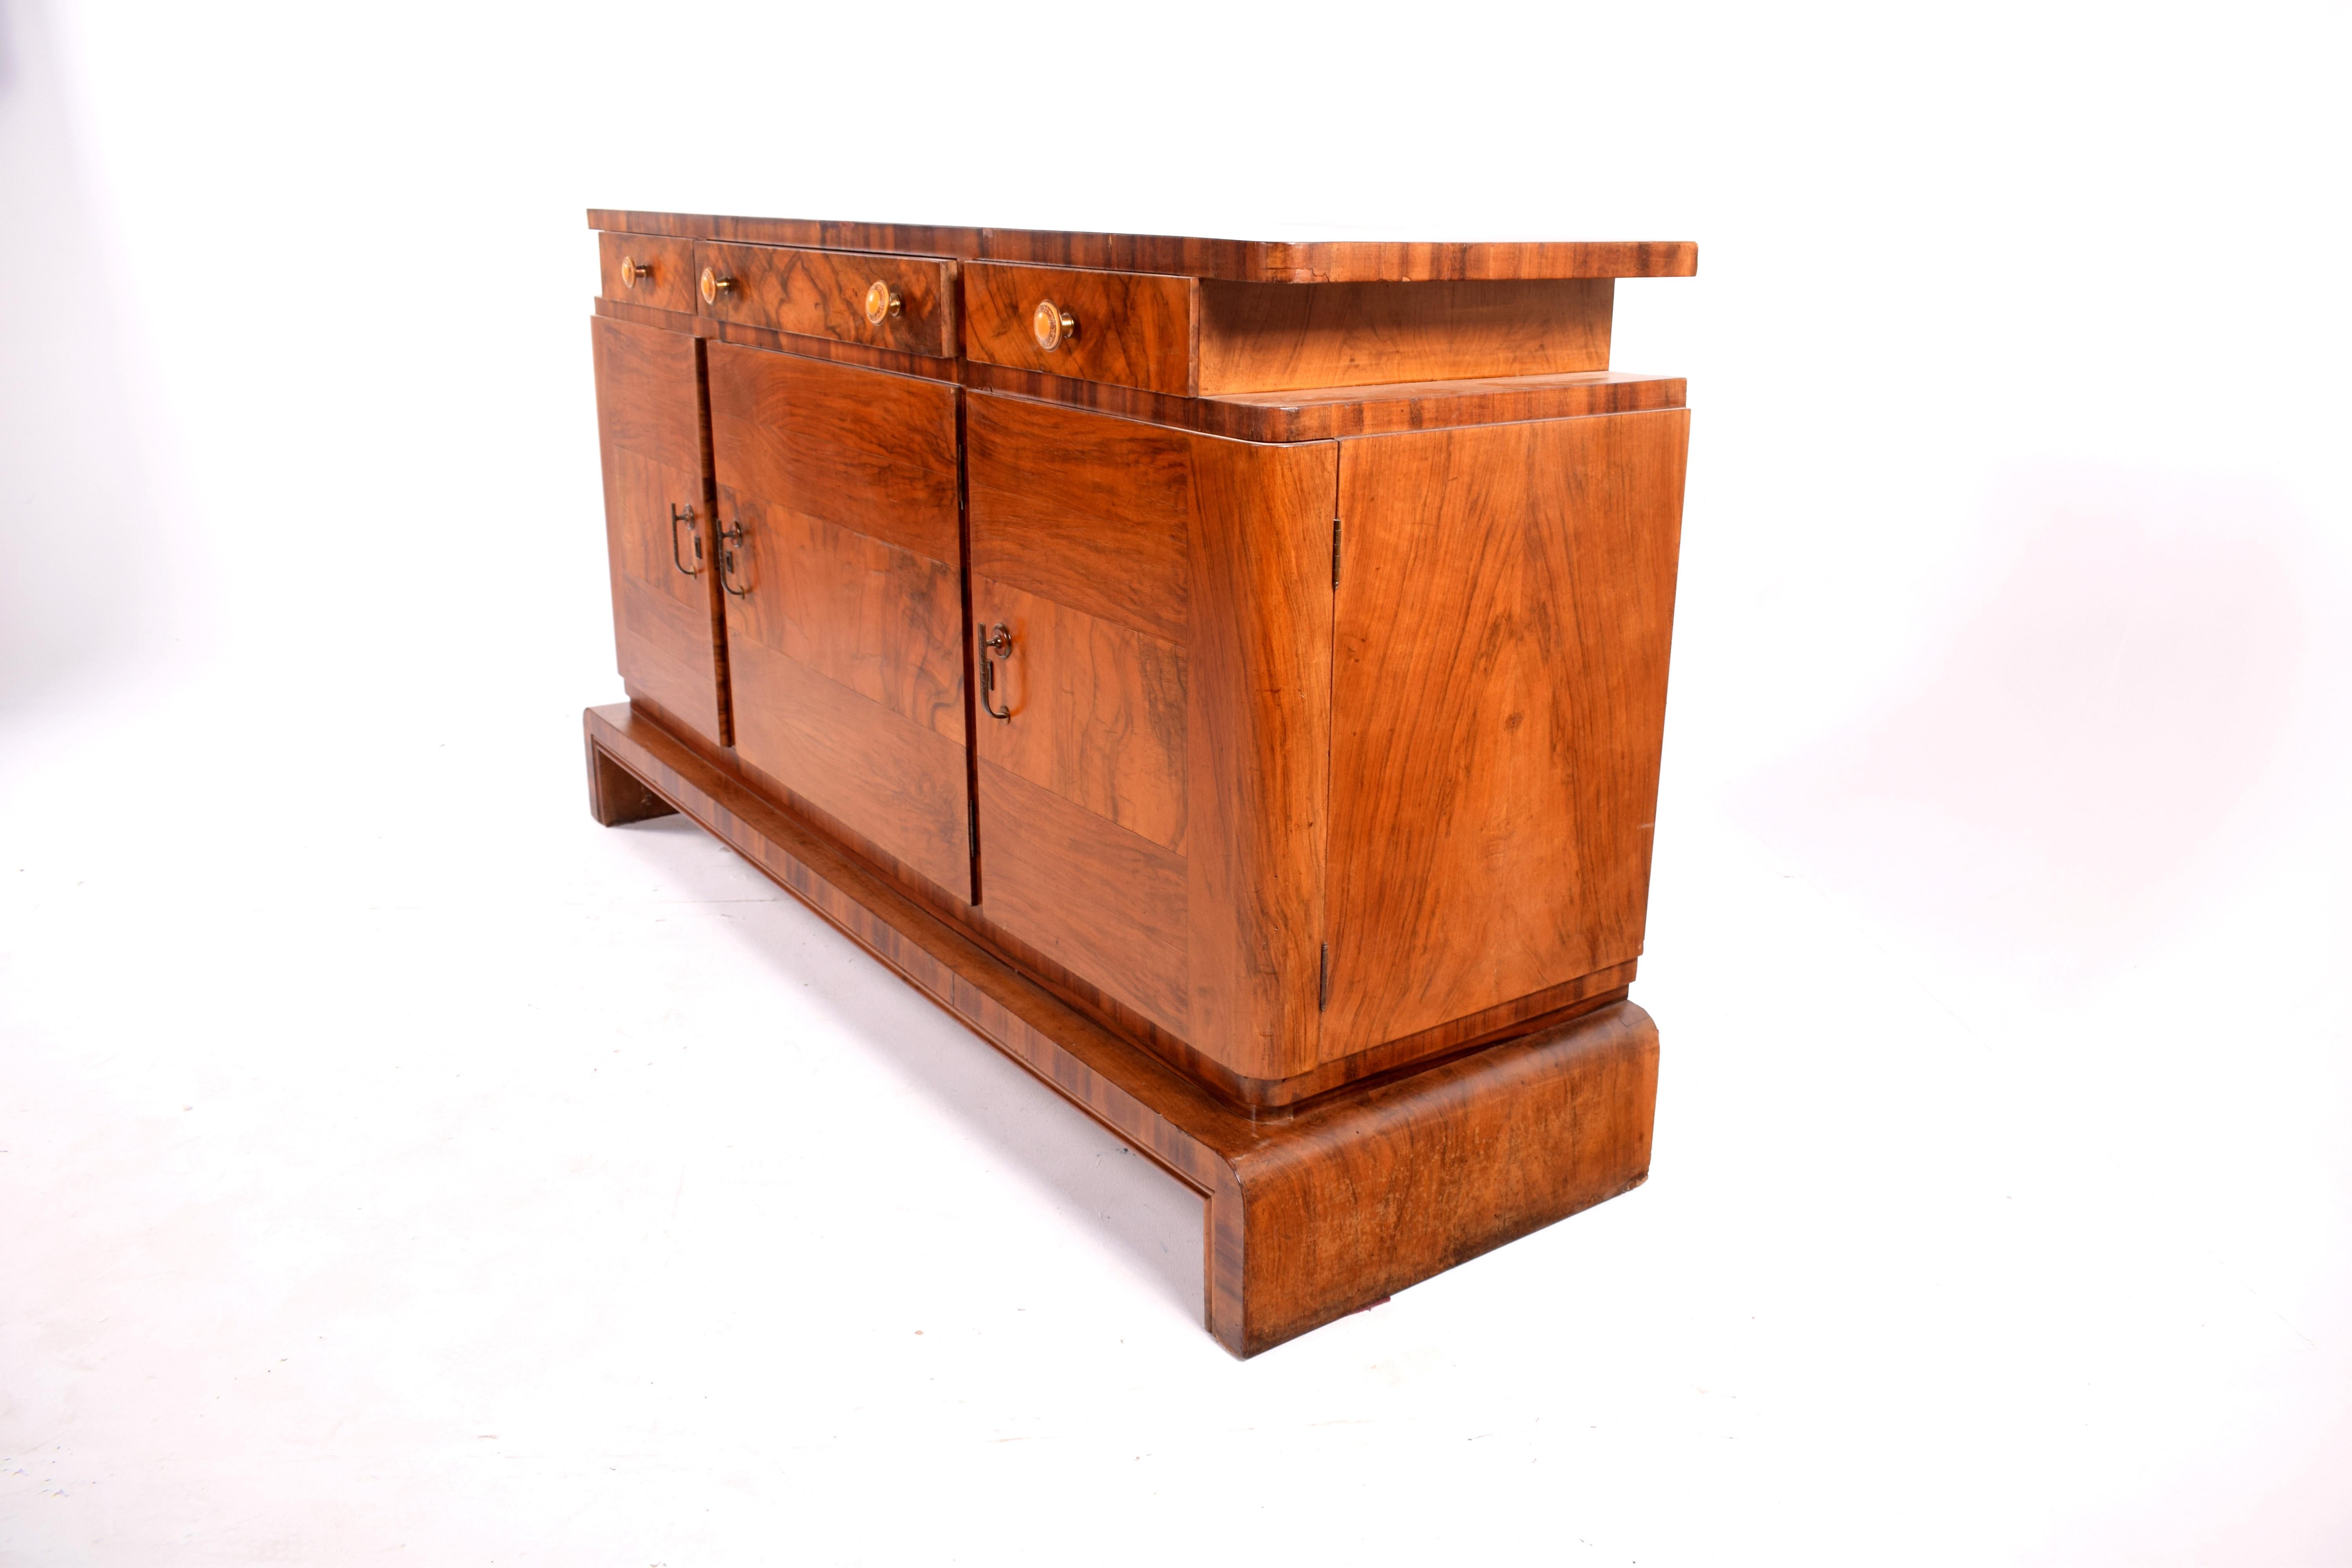 Art Deco walnut sideboard in good condition having been recently polished. The sideboard has a lift up top with 3 drawers and cupboard doors underneath with shelf.